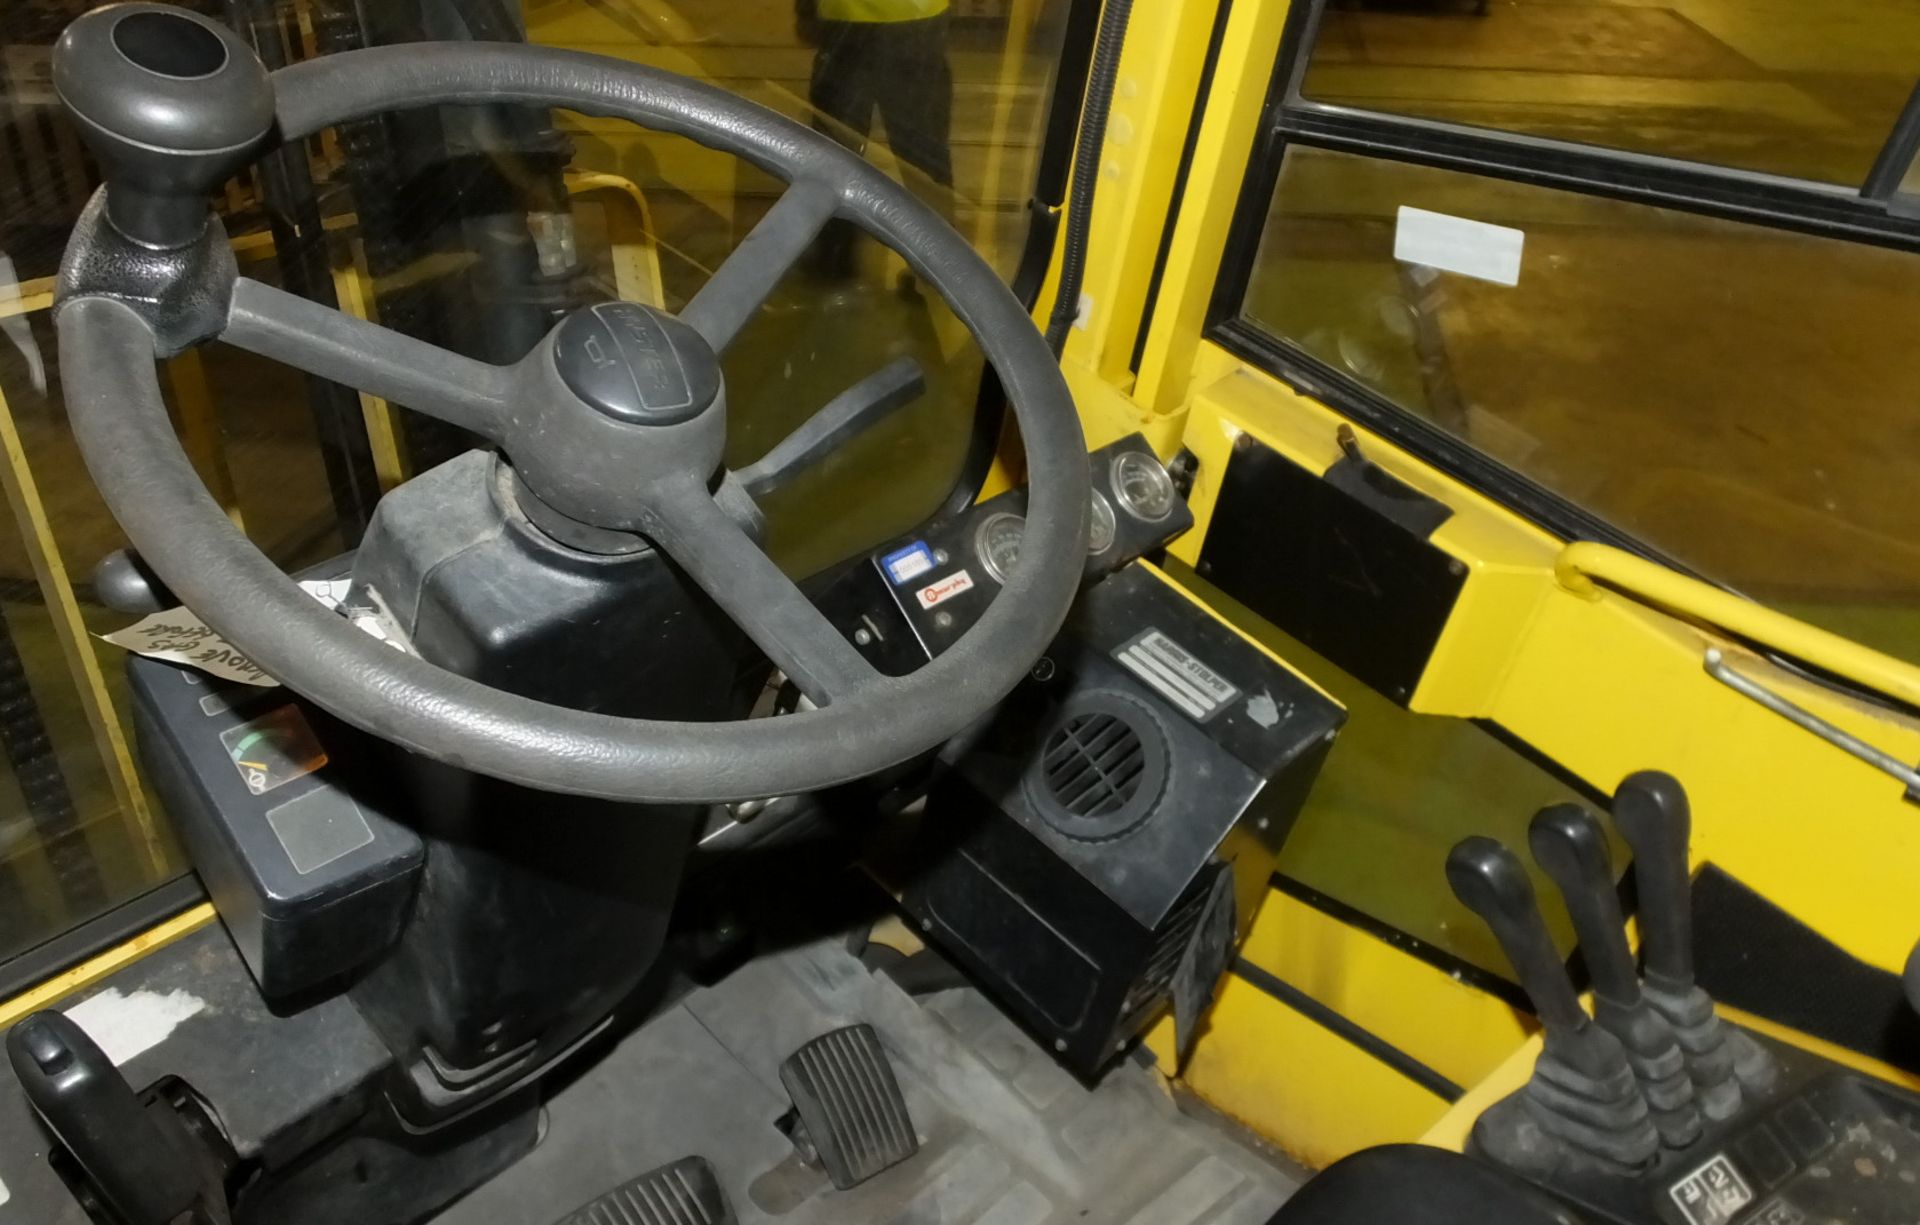 Gas Powered Counterbalance forklift - Hyster H2.50XM - 1999 - SWL 250 - New LOLER Certificate - Image 8 of 23